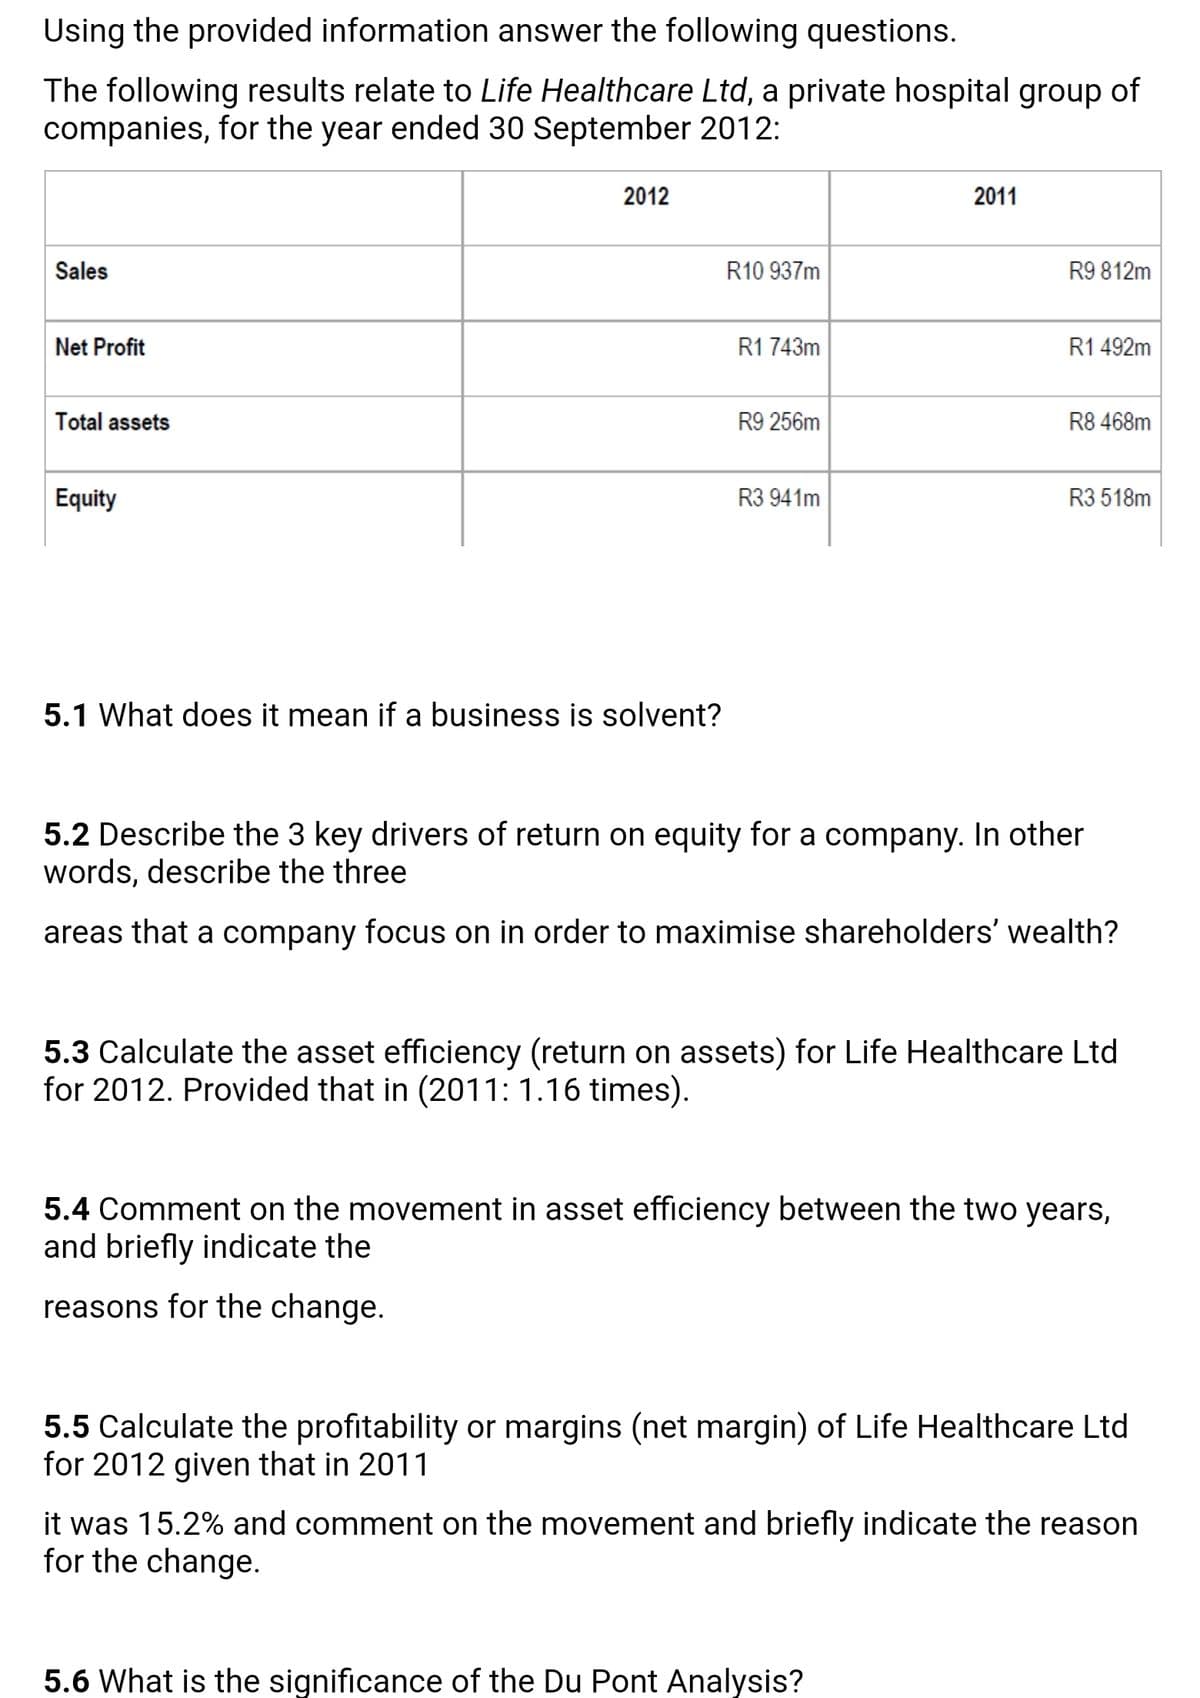 Using the provided information answer the following questions.
The following results relate to Life Healthcare Ltd, a private hospital group of
companies, for the year ended 30 September 2012:
2012
2011
Sales
R10 937m
R9 812m
Net Profit
R1 743m
R1 492m
Total assets
R9 256m
R8 468m
Equity
R3 941m
R3 518m
5.1 What does it mean if a business is solvent?
5.2 Describe the 3 key drivers of return on equity for a company. In other
words, describe the three
areas that a company focus on in order to maximise shareholders' wealth?
5.3 Calculate the asset efficiency (return on assets) for Life Healthcare Ltd
for 2012. Provided that in (2011: 1.16 times).
5.4 Comment on the movement in asset efficiency between the two years,
and briefly indicate the
reasons for the change.
5.5 Calculate the profitability or margins (net margin) of Life Healthcare Ltd
for 2012 given that in 2011
it was 15.2% and comment on the movement and briefly indicate the reason
for the change.
5.6 What is the significance of the Du Pont Analysis?
